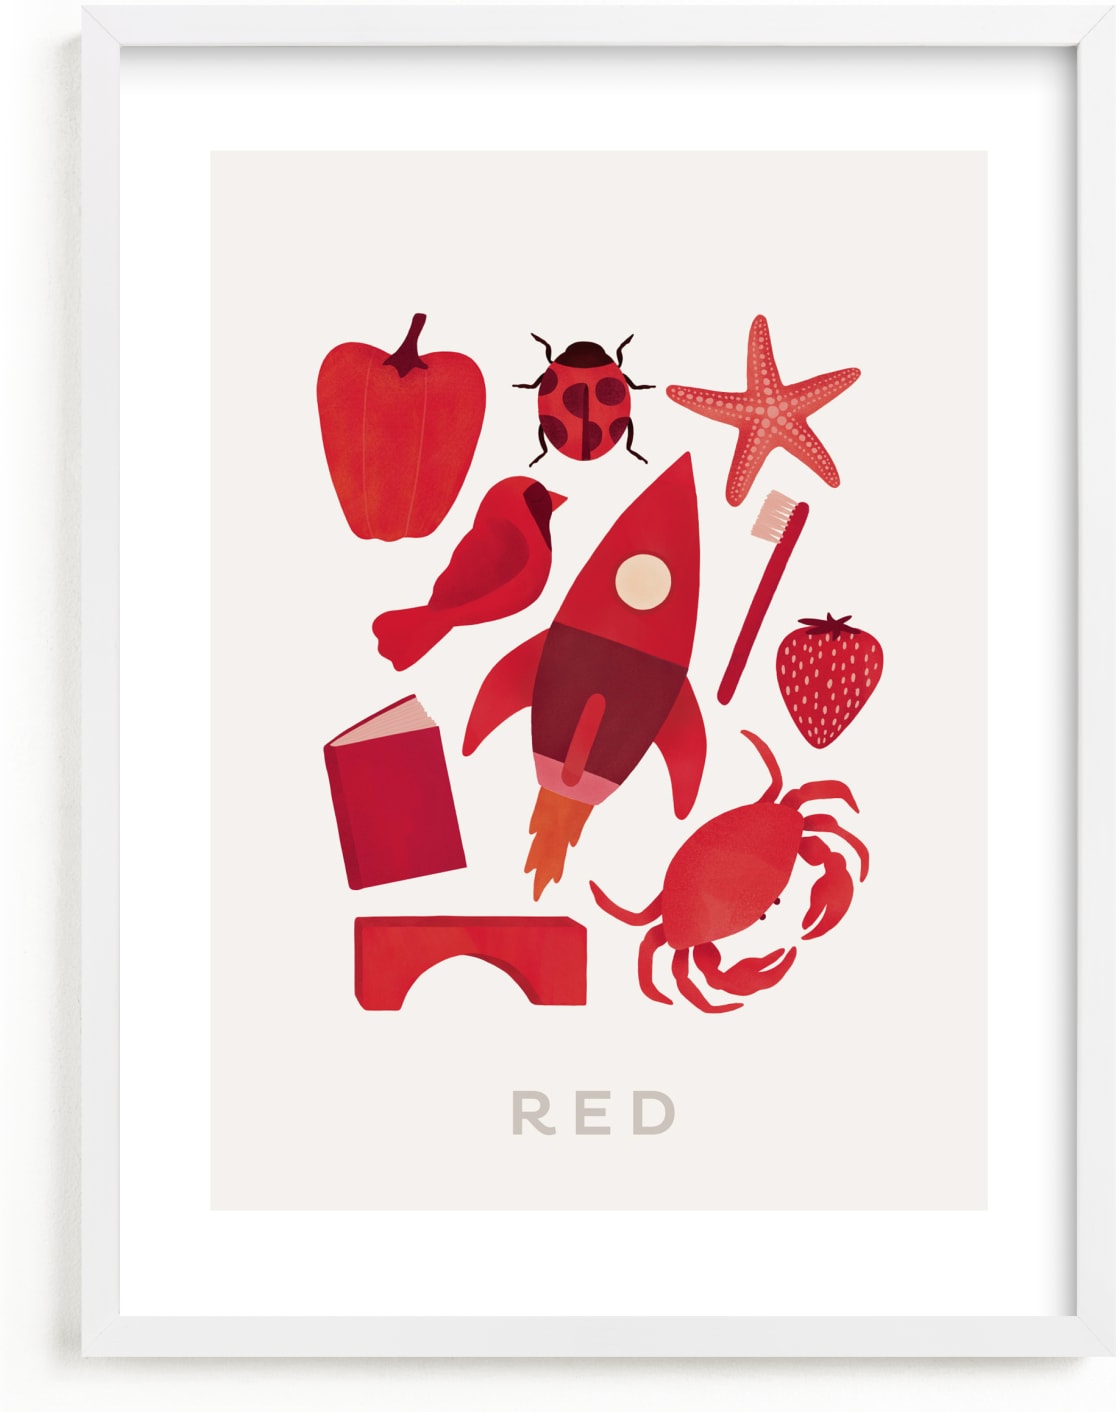 This is a classic colors kids wall art by Ana Peake called Ten Red Things.